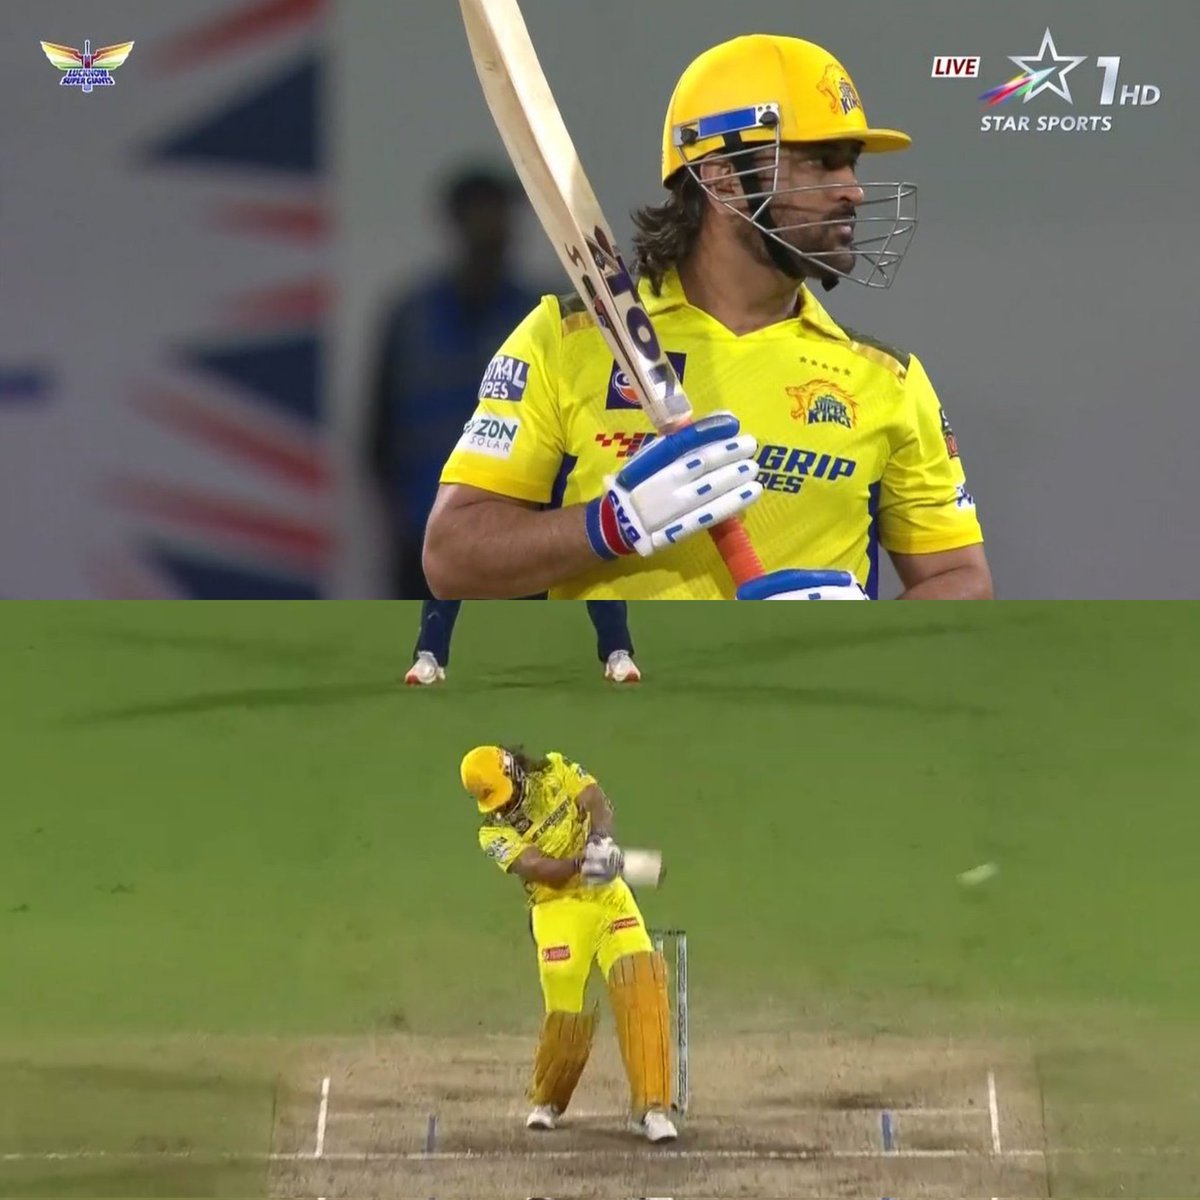 Dhoni finishes off in style 😎💥 #WhistlePodu #IPLOnStar @MSDhoni